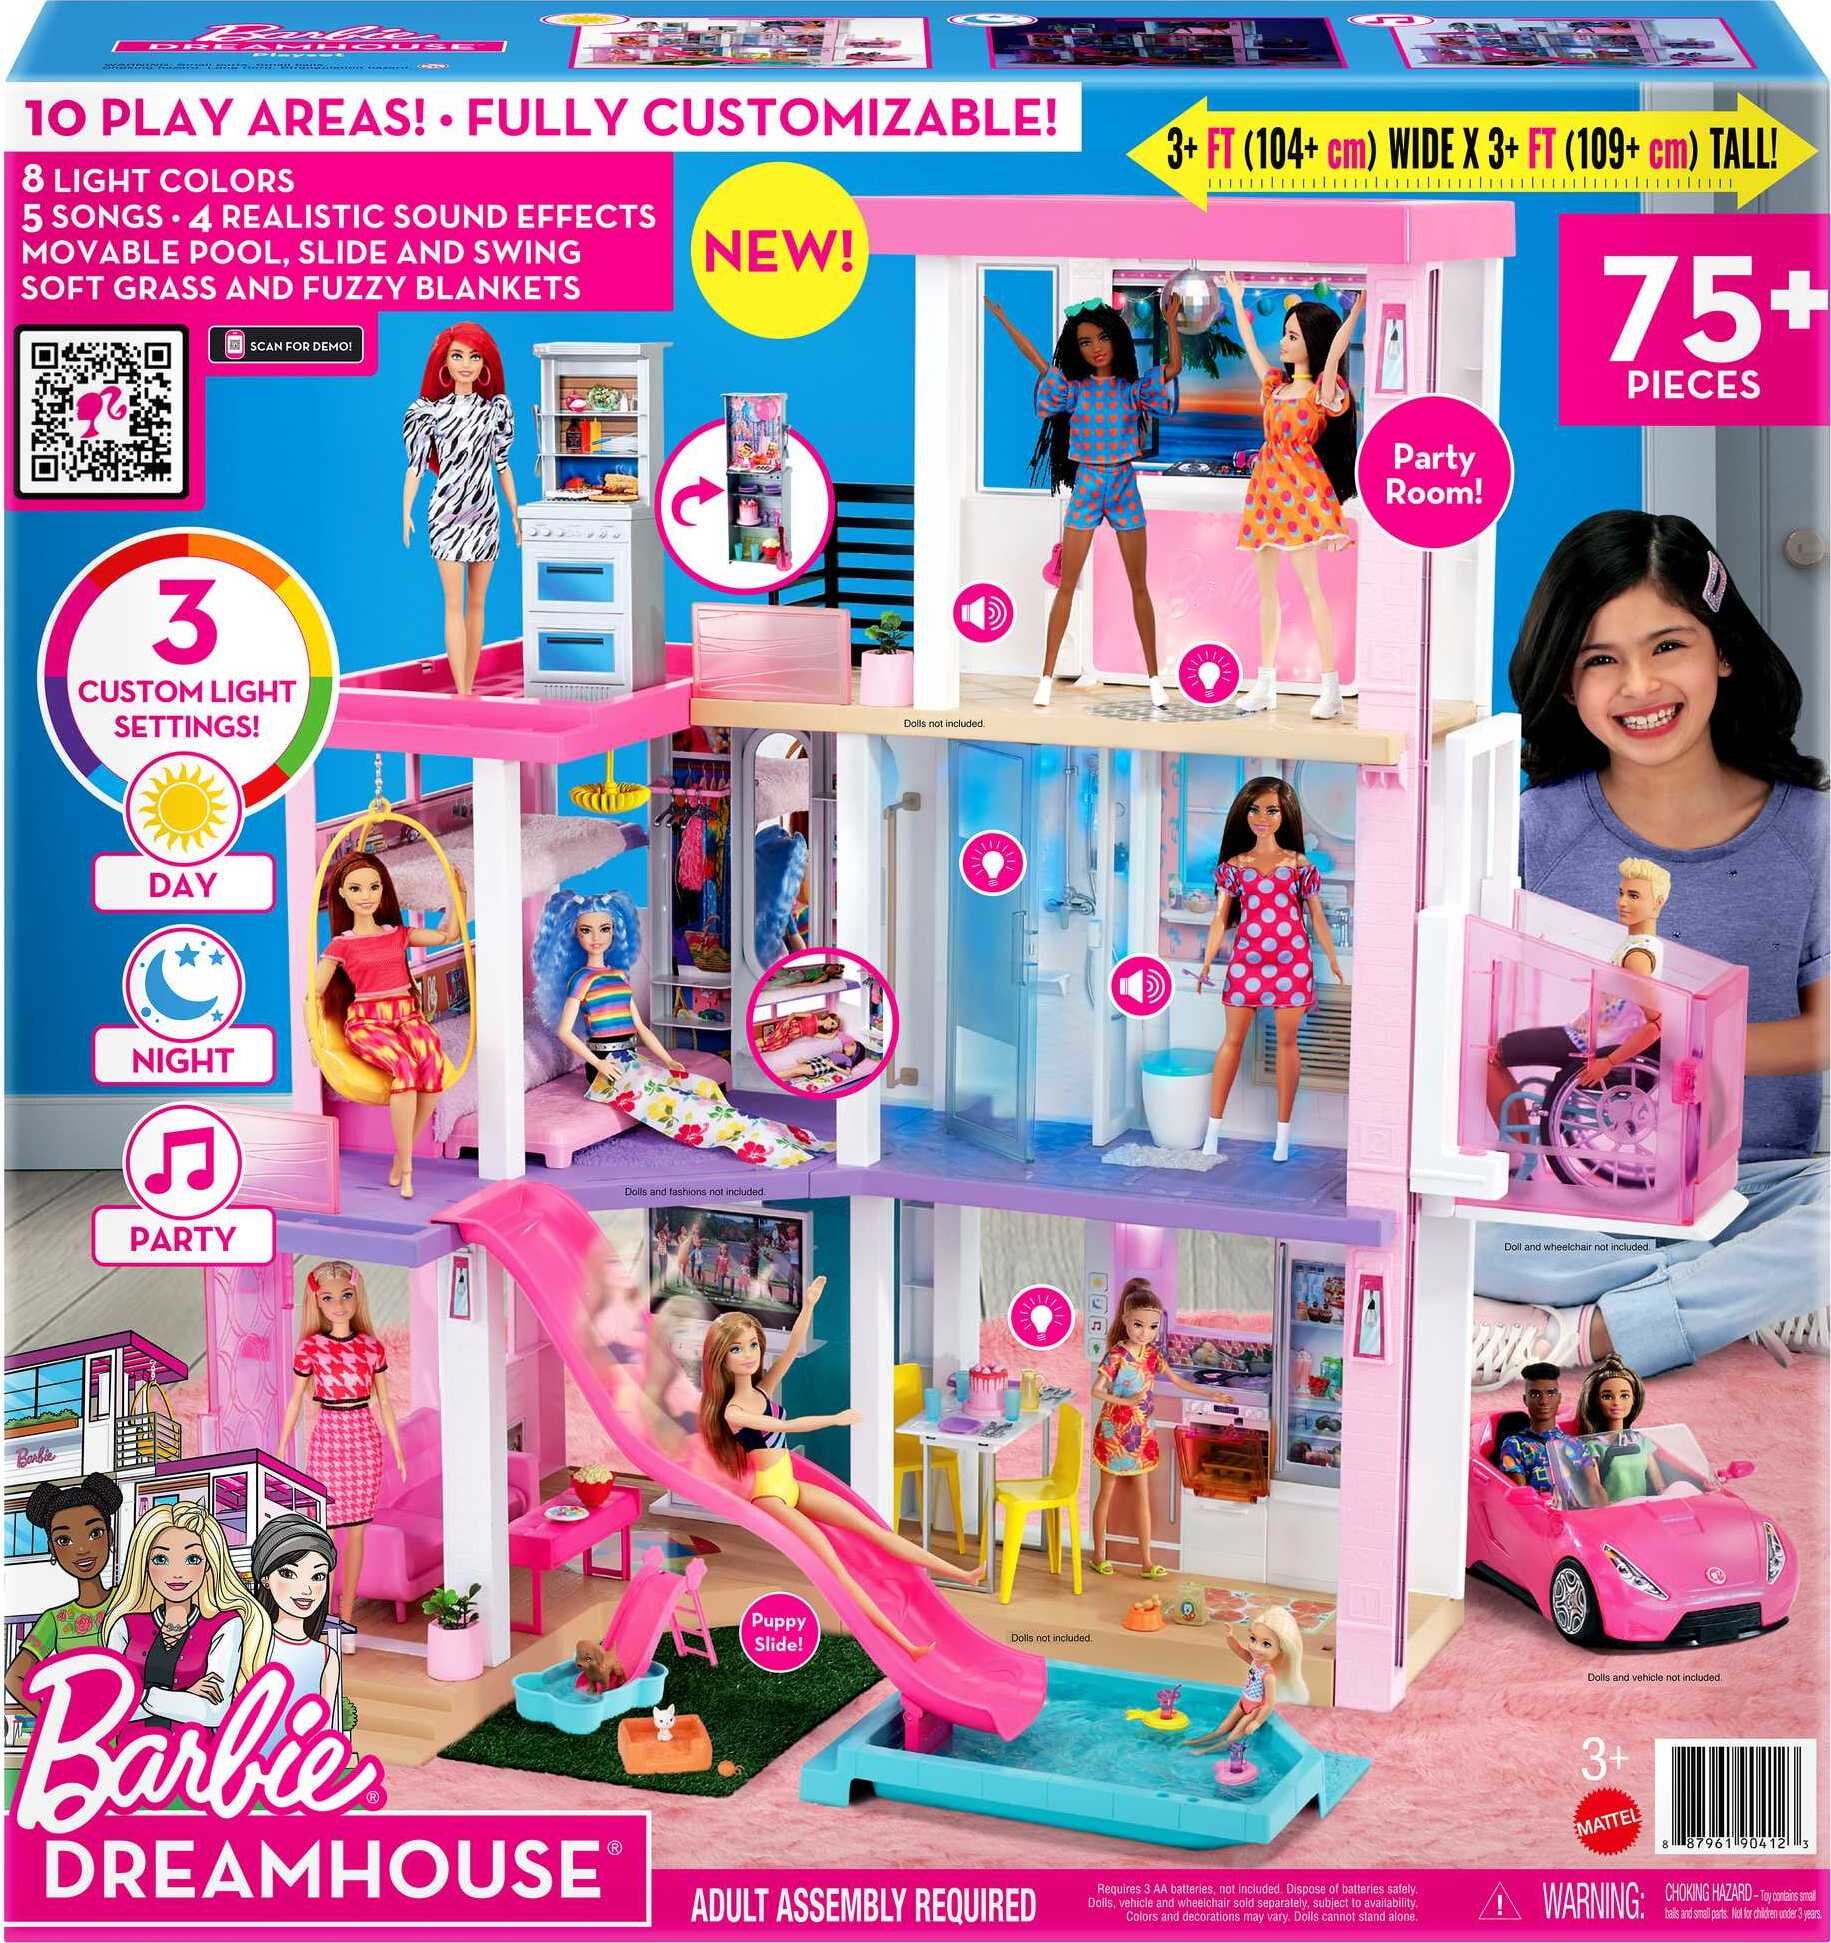 Barbie 3 Dreamhouse Townhouse CJR47 Electronic part NEW Fan works spin table top 